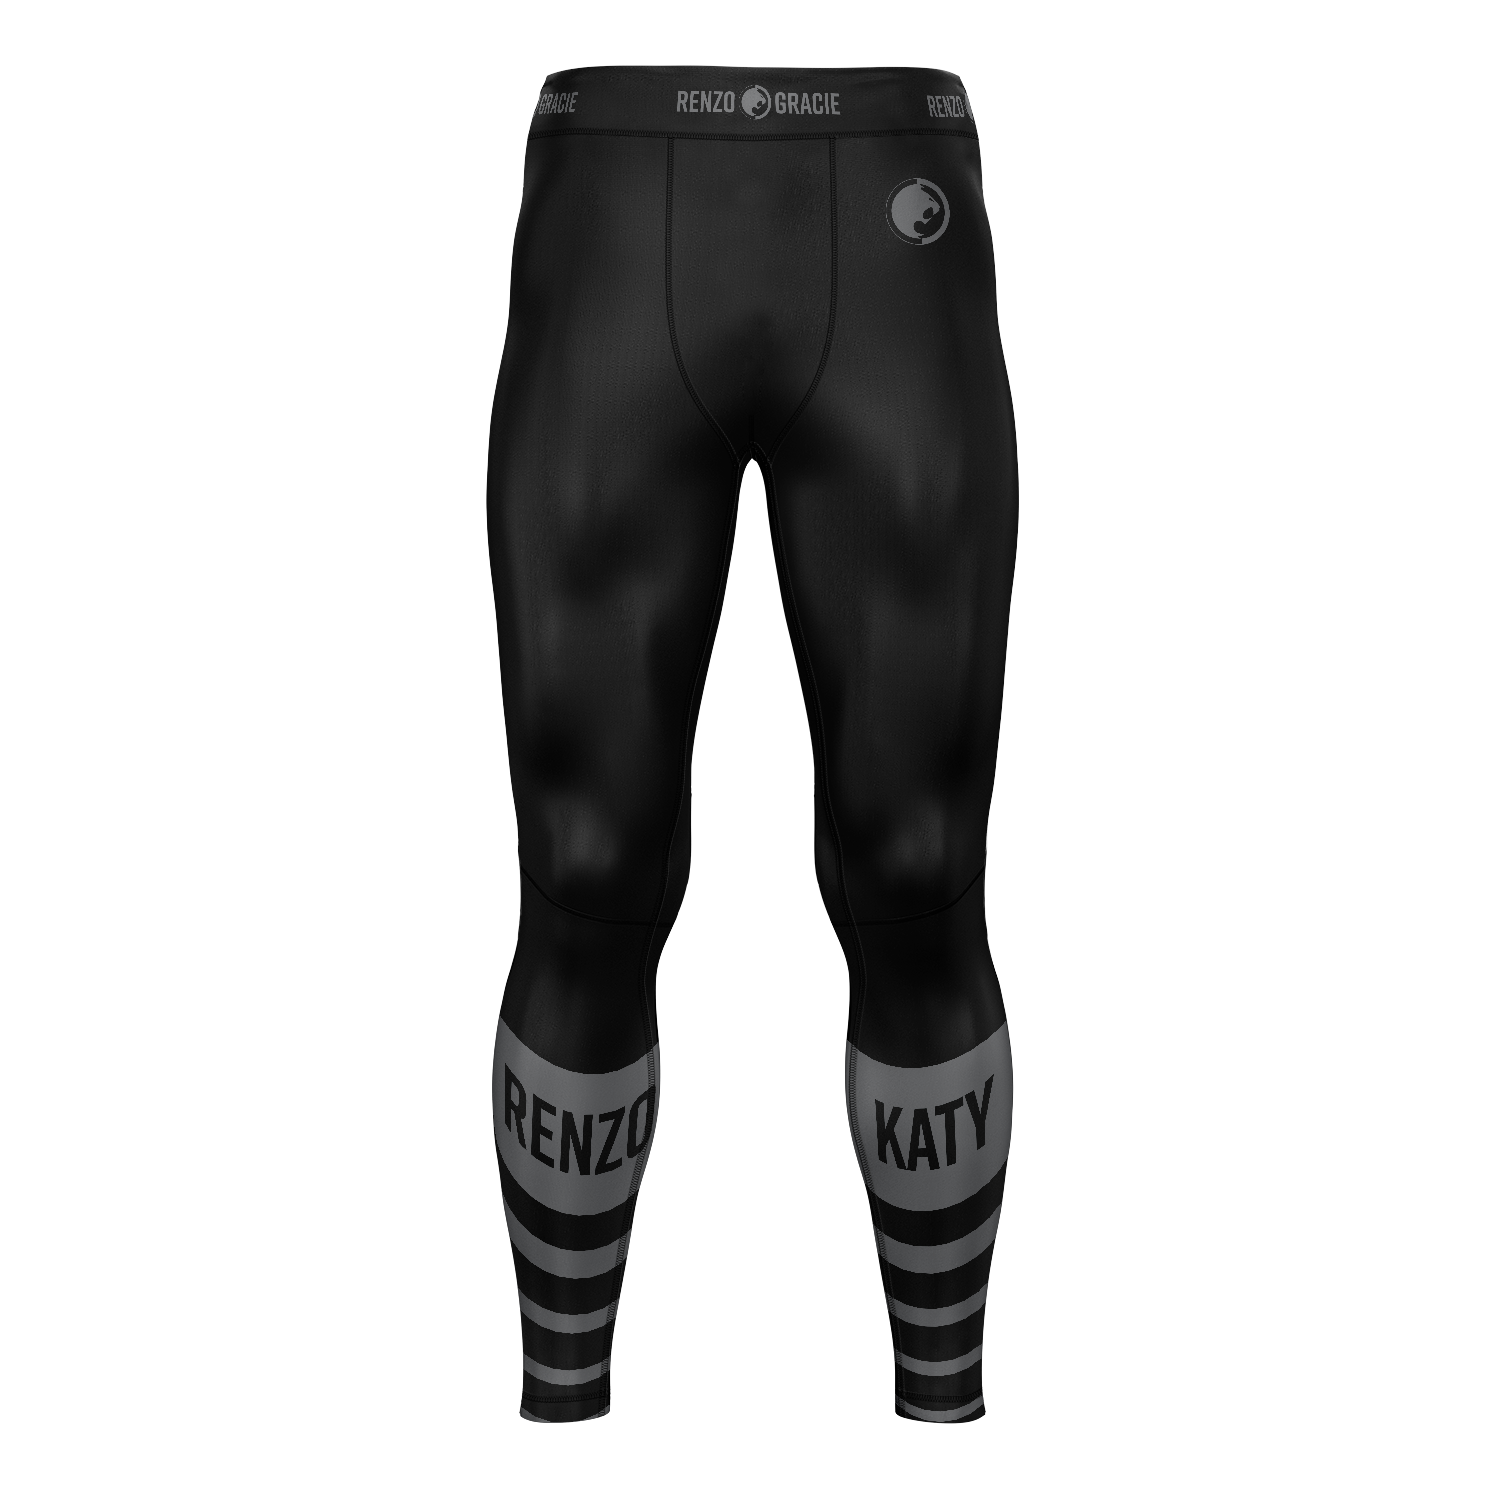 wholesale Renzo Gracie Katy men's grappling tights Standard Issue, black and grey